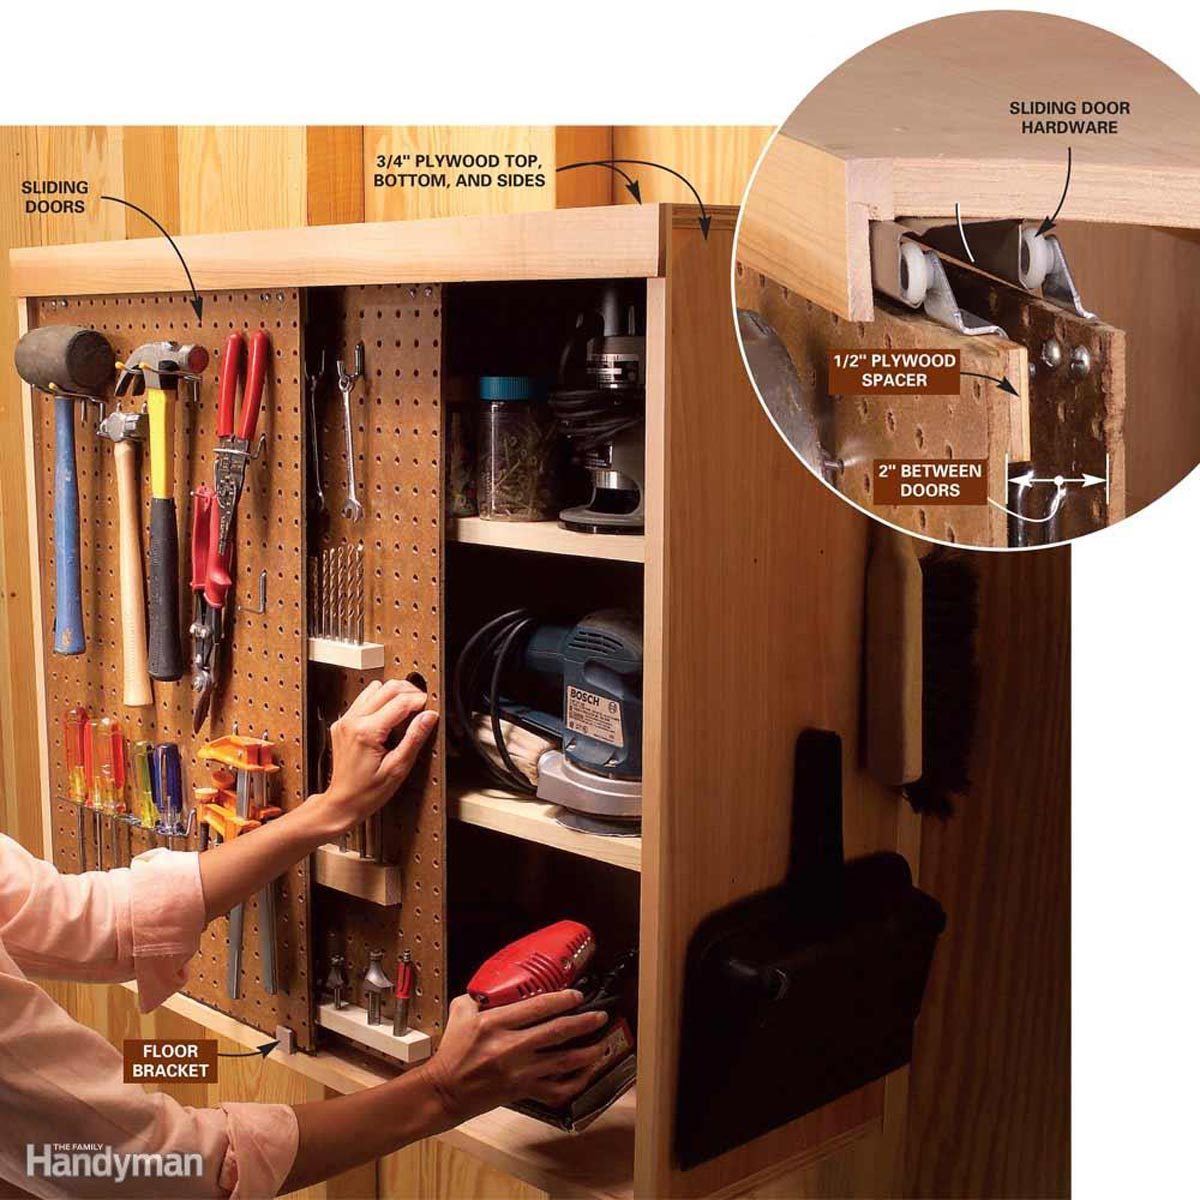 21 Top Tool Storage Tips, Tricks and Ideas